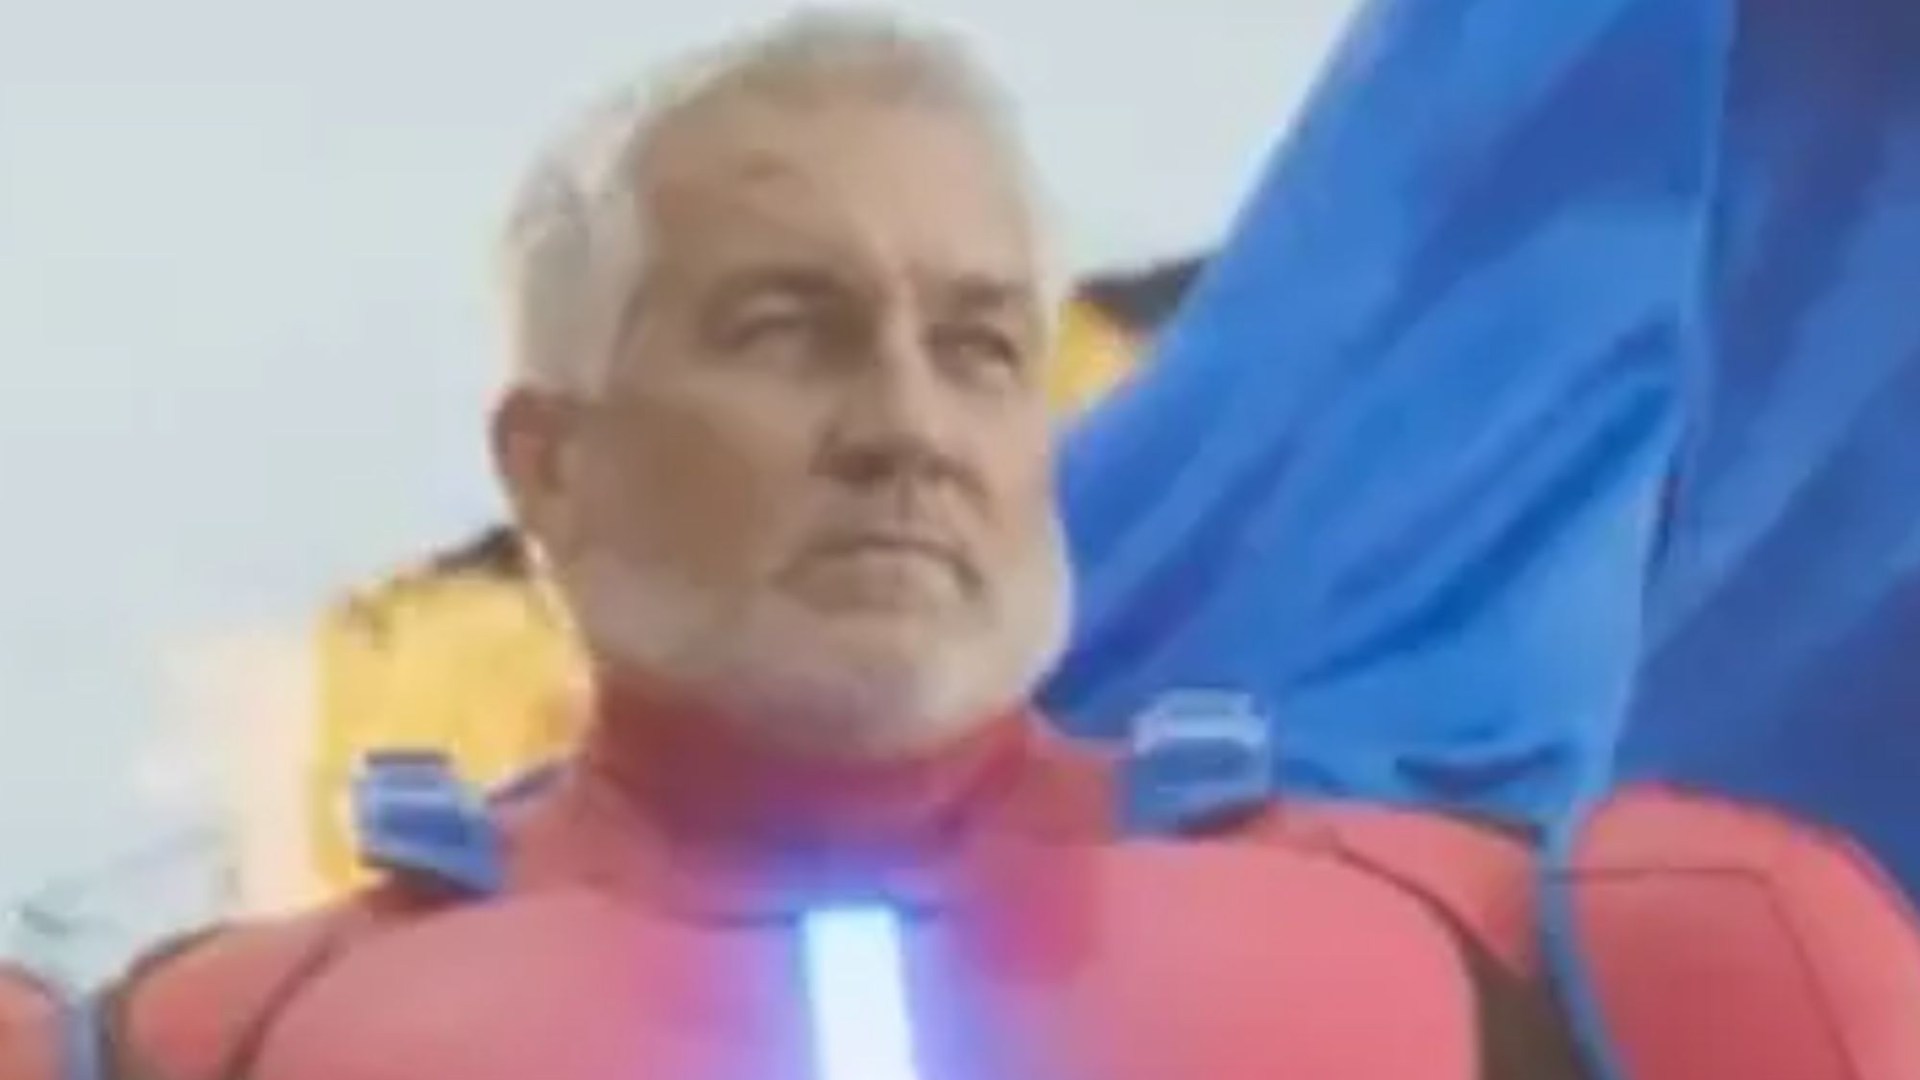 Bake Off star Paul Hollywood made shock request to producers when filming advert [Video]